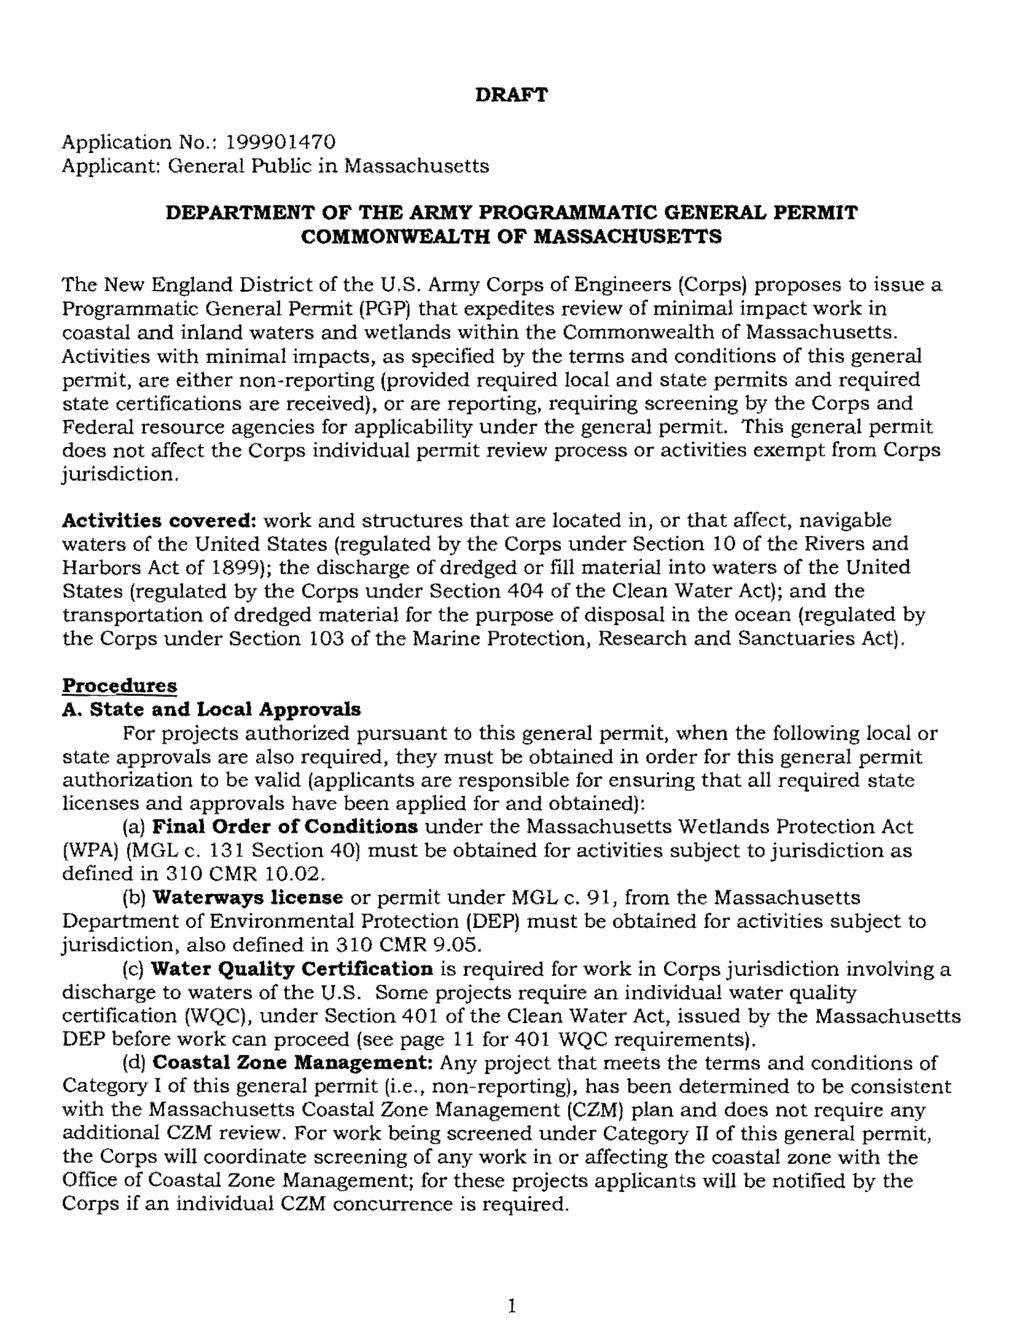 Application No.: 199901470 Applicant: General Public in Massachusetts DRAFT DEPARTMENT OF THE ARMY PROGRAMMATIC GENERAL PERMIT COMMONWEALTH OF MASS